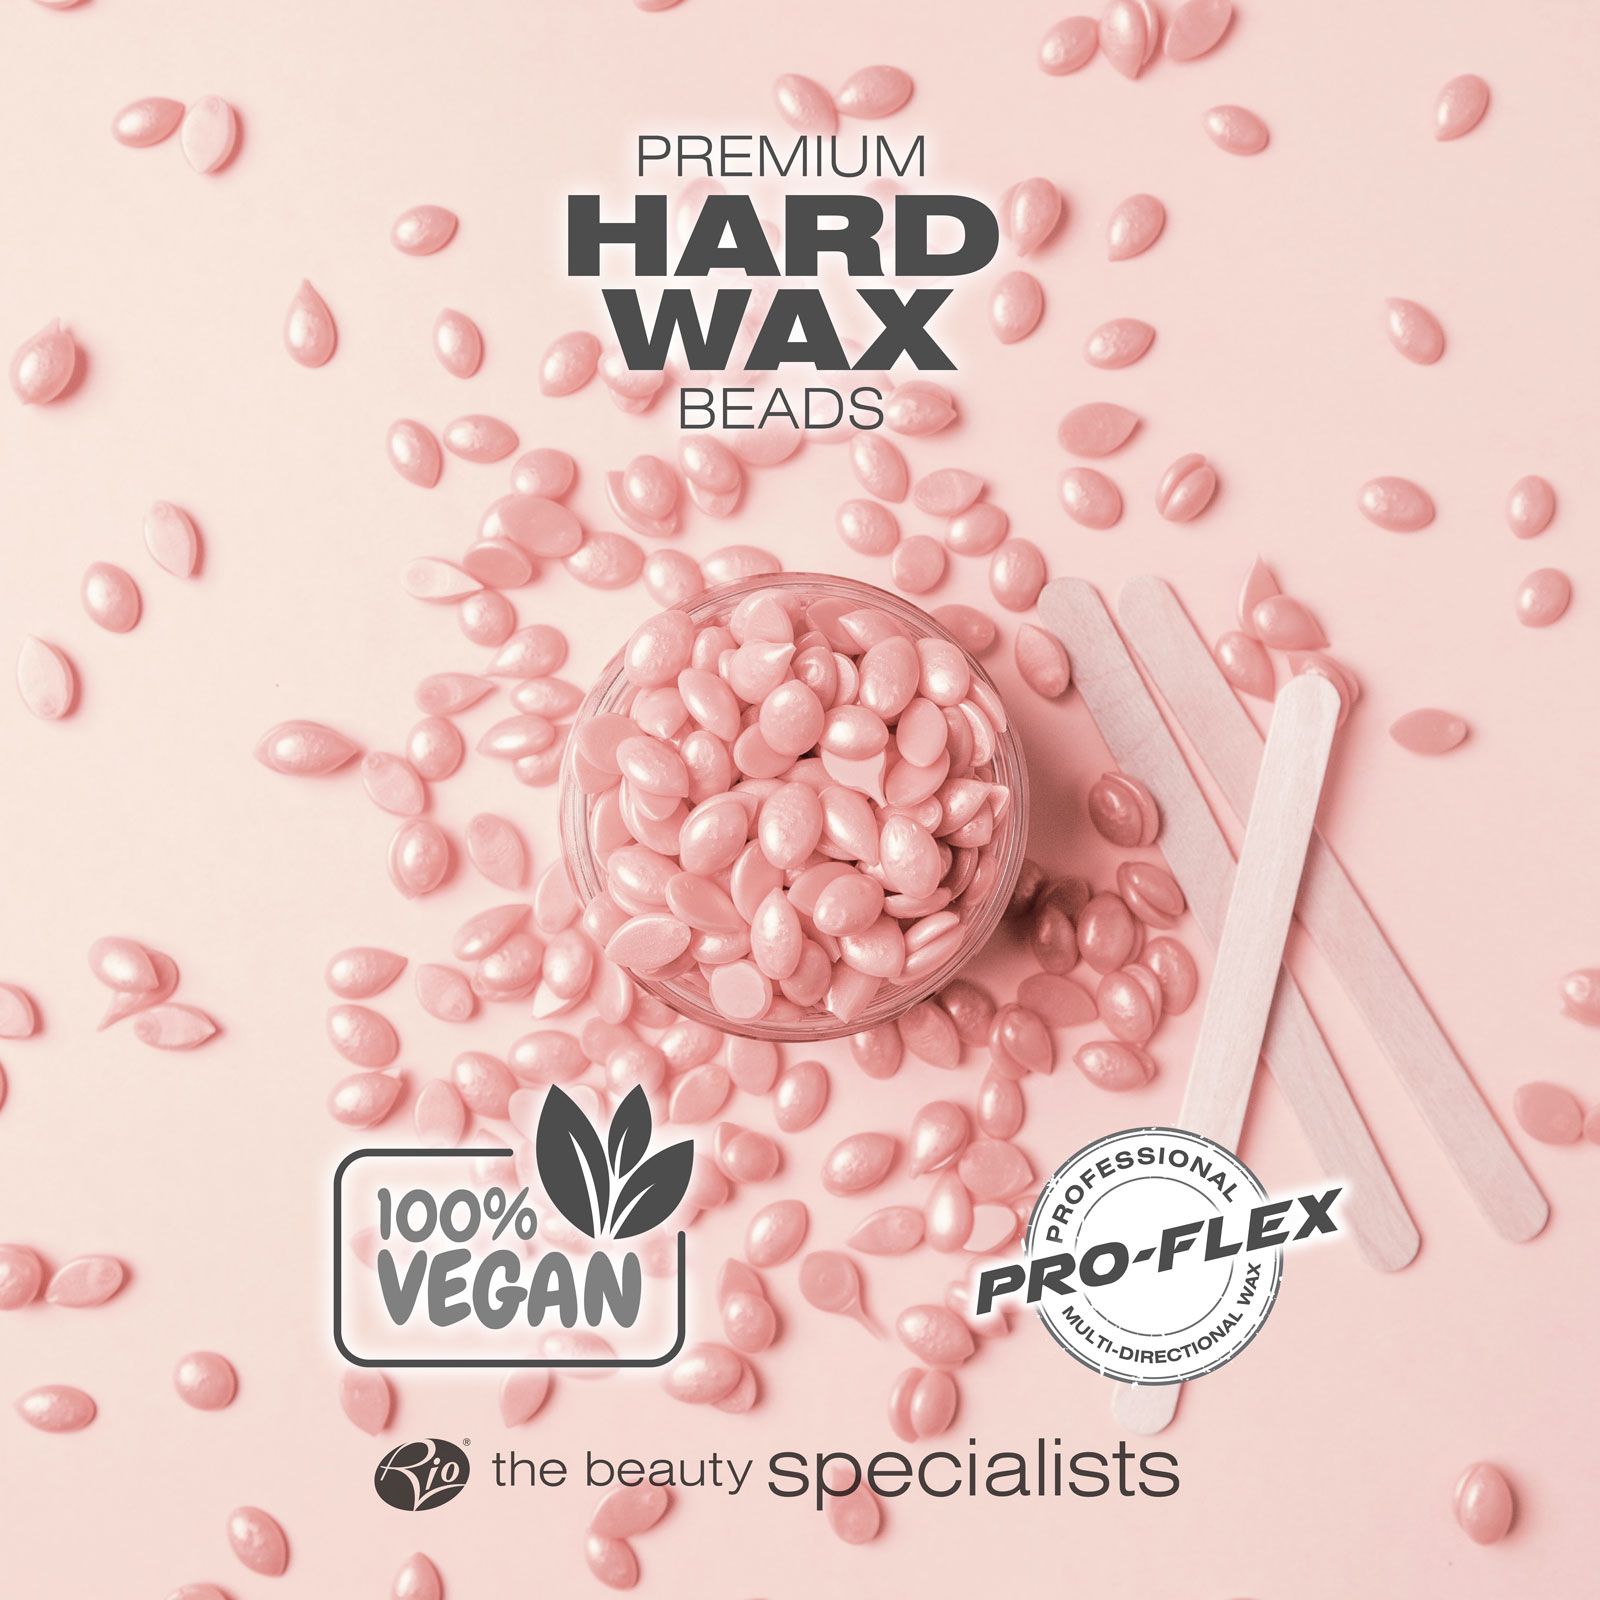 Rose premium hard wax beads laid out with spatulas labelled 100% vegan and professional pro-flex wax